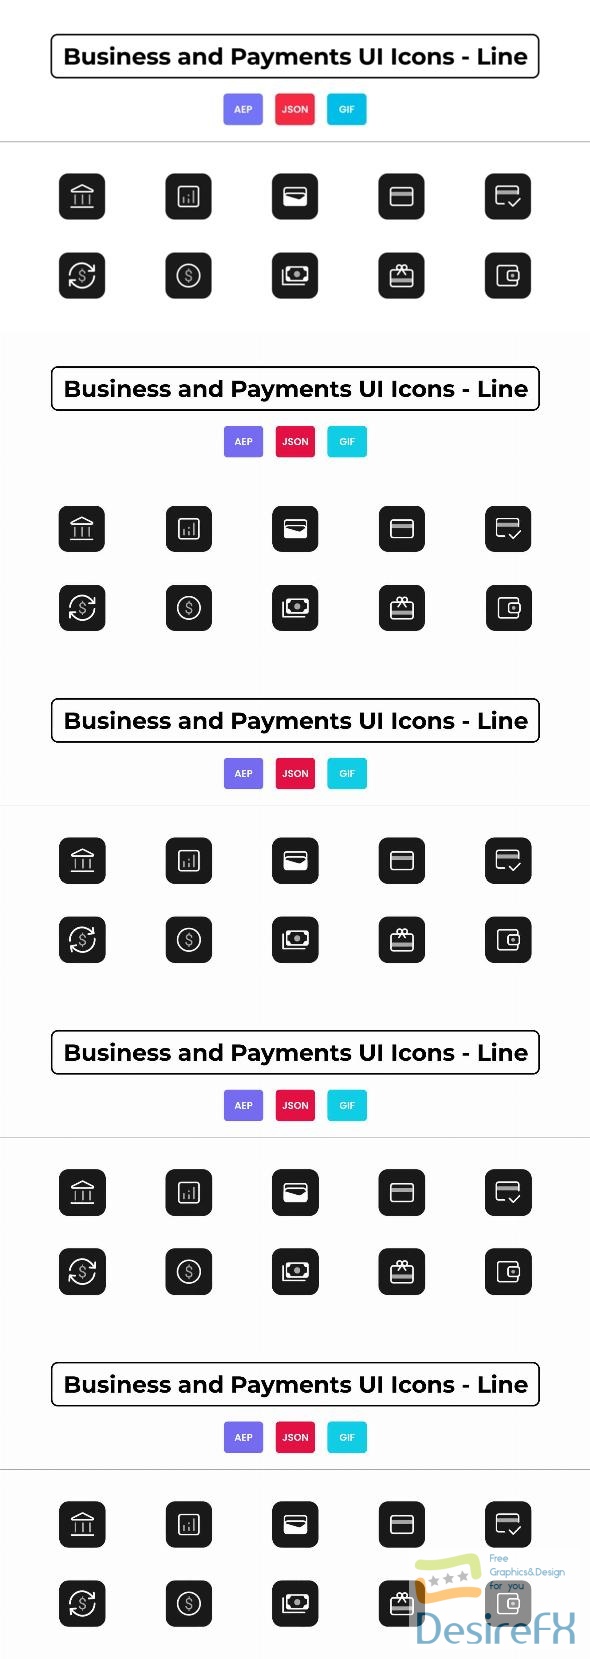 VideoHive Business and Payments UI Icons - Line 44836383